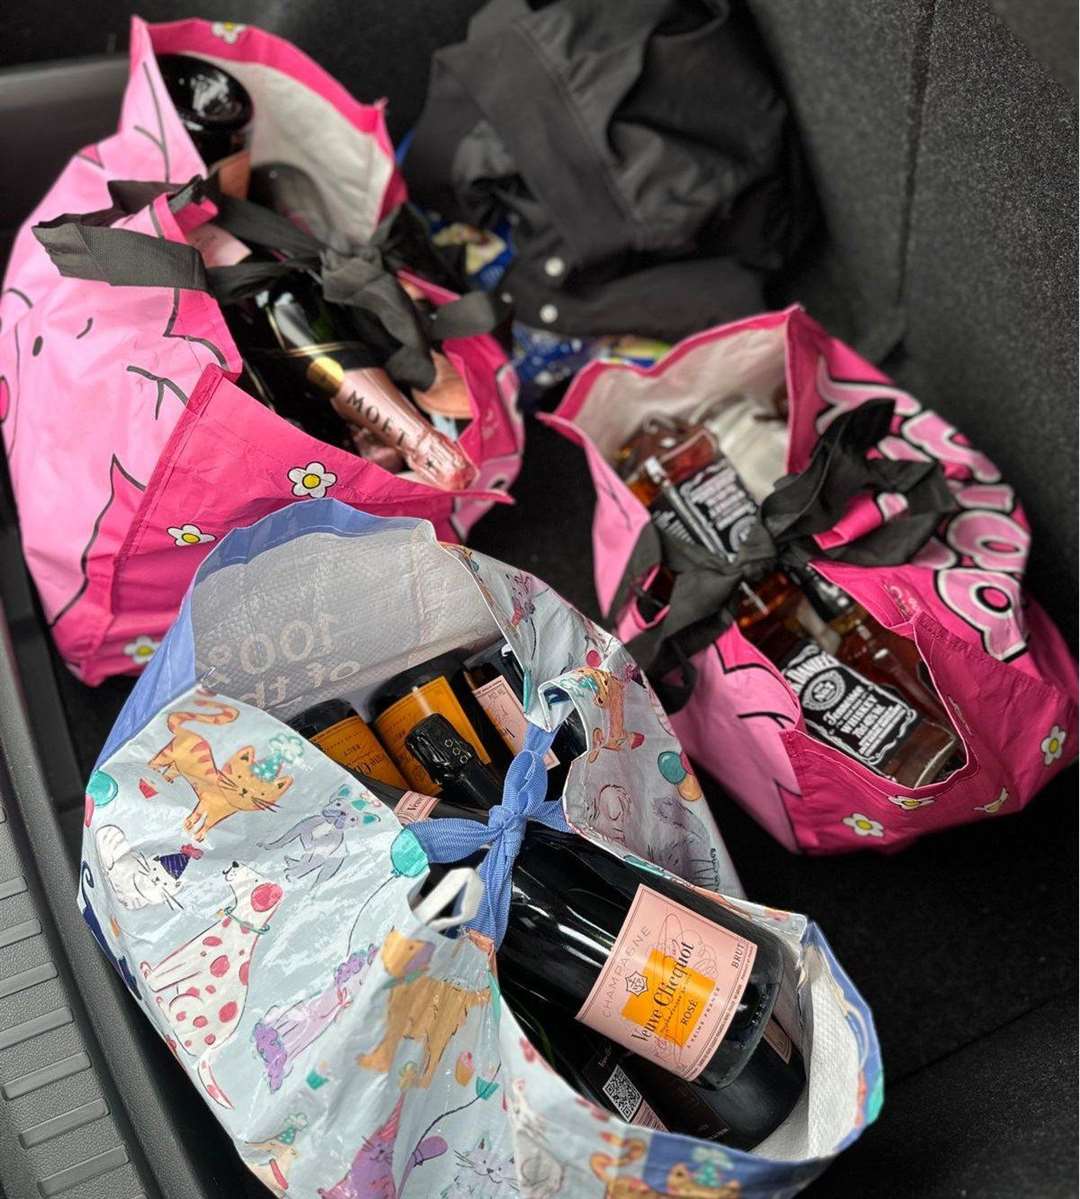 The items were recovered by police in Percy Pig bags on the Swanley Interchange. Picture: Kent Police Tactical Operations (KPTacOps)